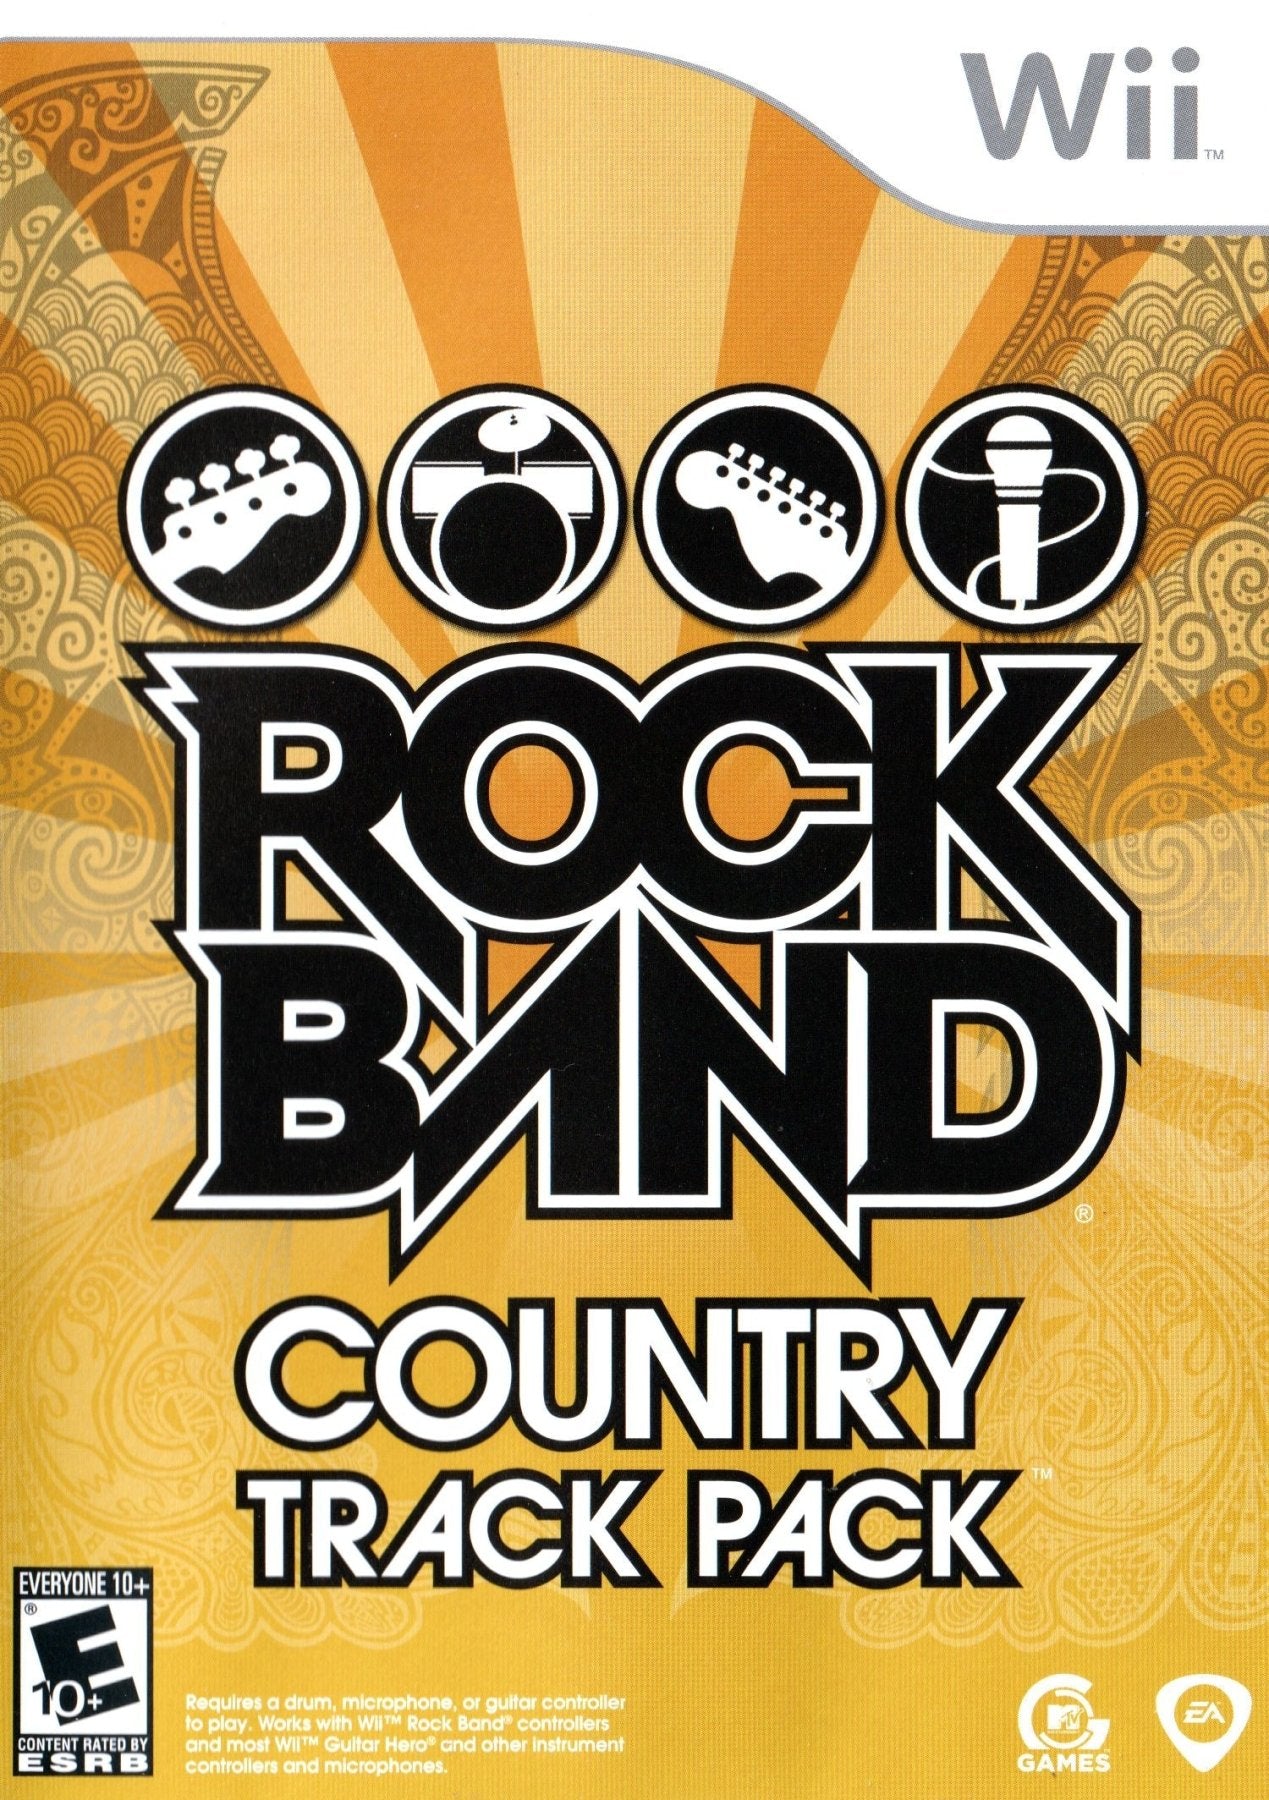 Rock Band Country Track Pack - Wii - Retro Island Gaming